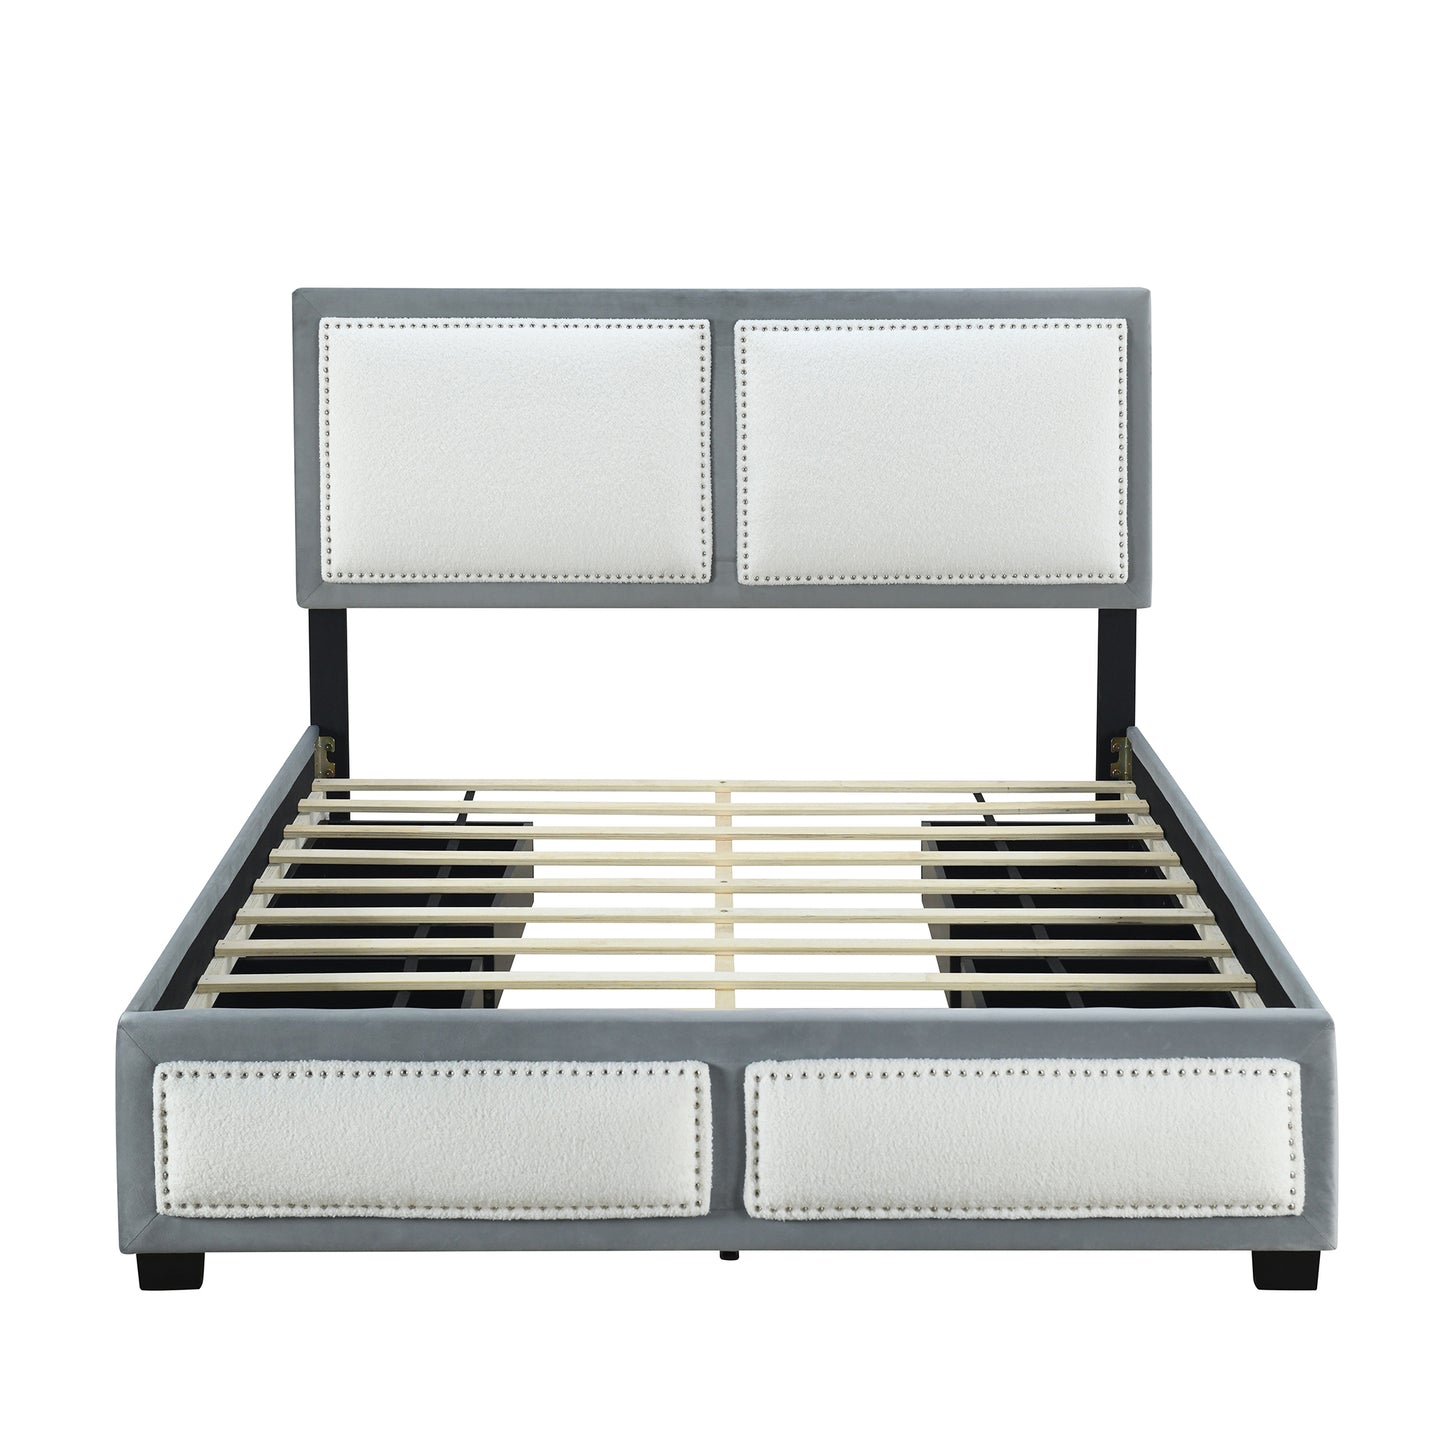 Queen Size Upholstered Platform Bed with Large Rivet-decorated Backrests and 4 Drawers, Velvet matched with Teddy Fleece, Gray+White